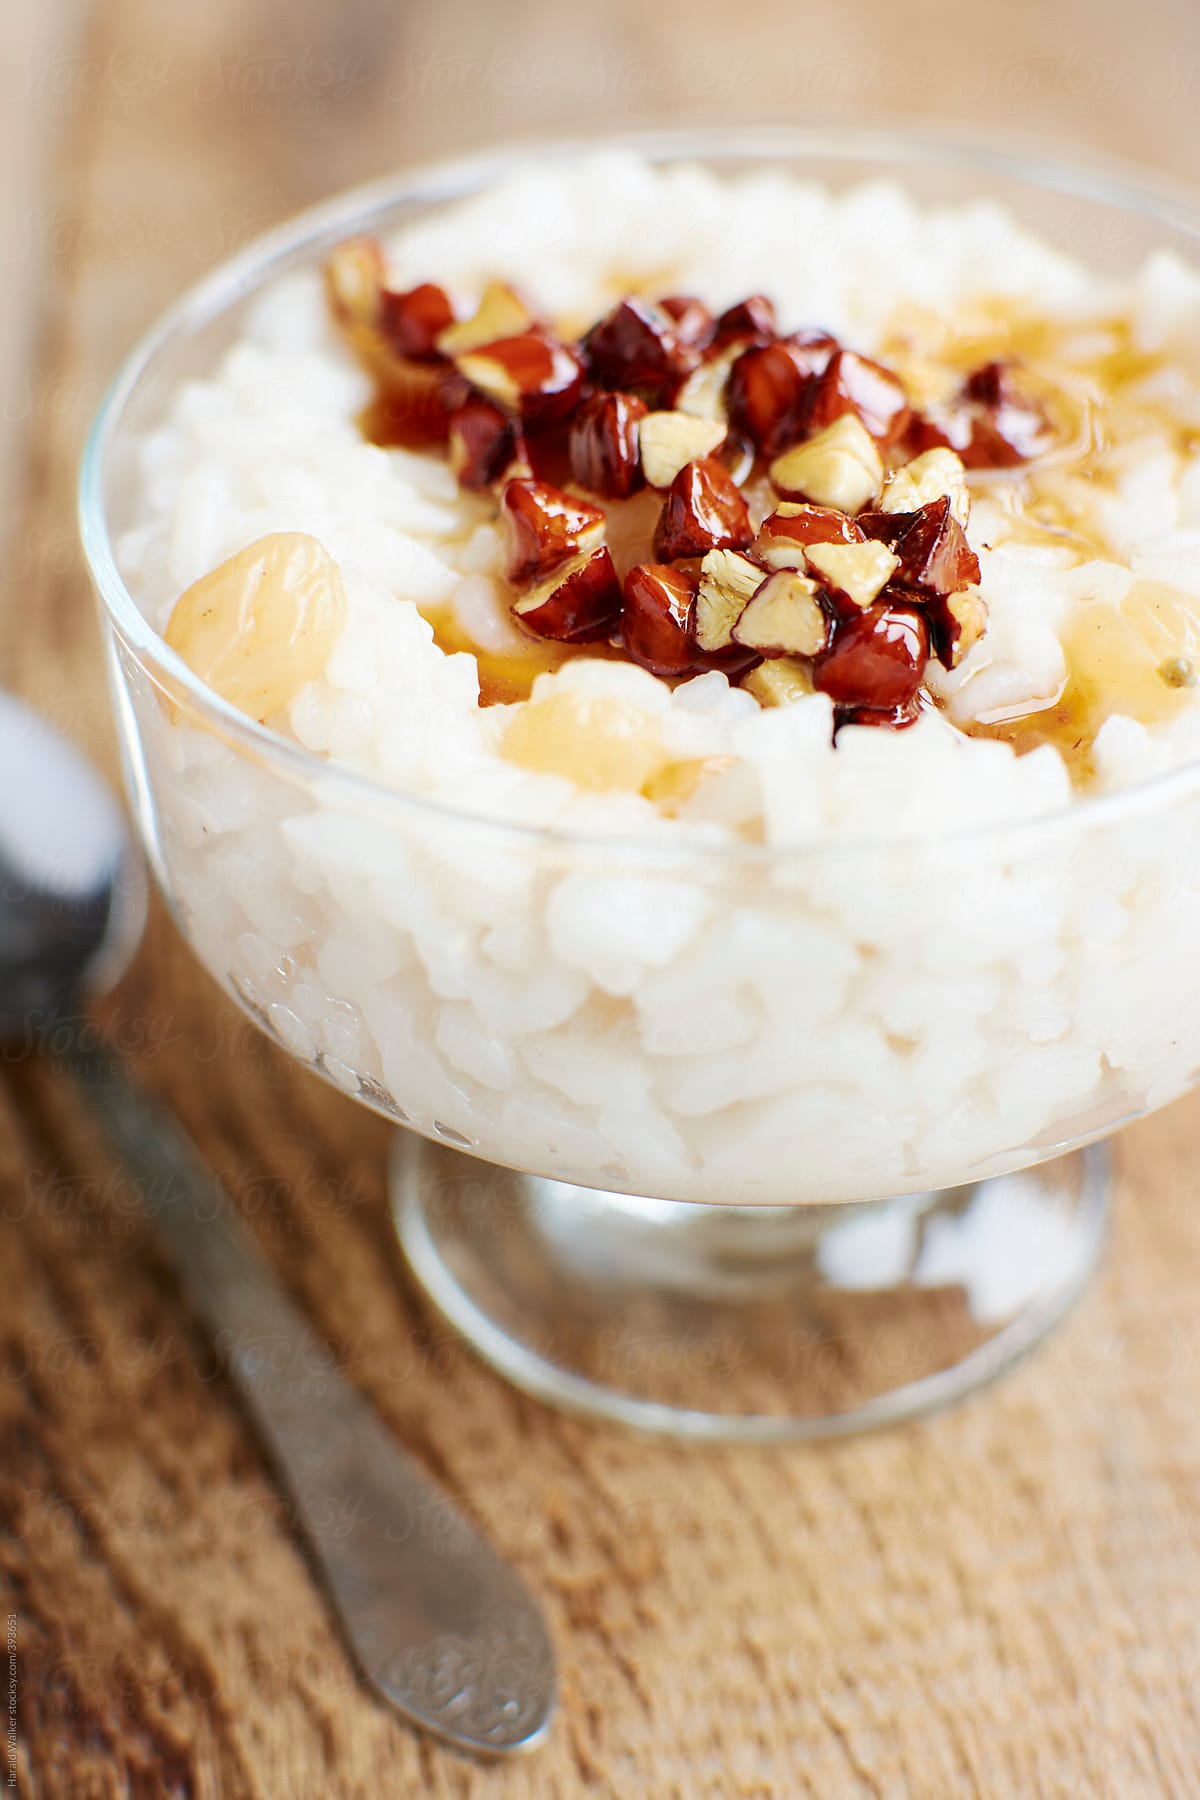 Beechnut topping over Rice Pudding